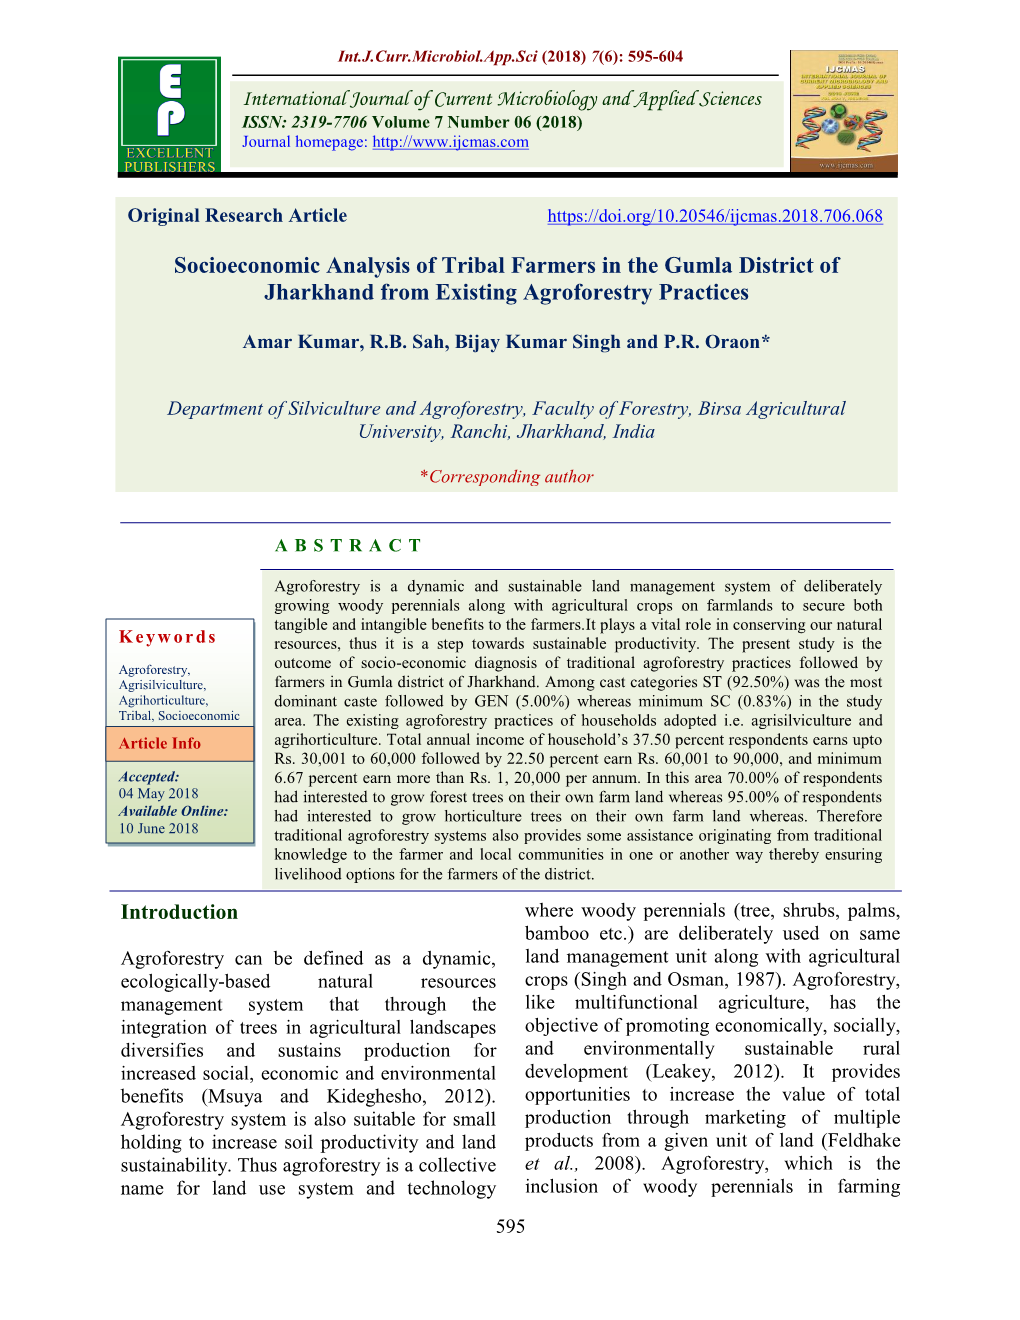 Socioeconomic Analysis of Tribal Farmers in the Gumla District of Jharkhand from Existing Agroforestry Practices